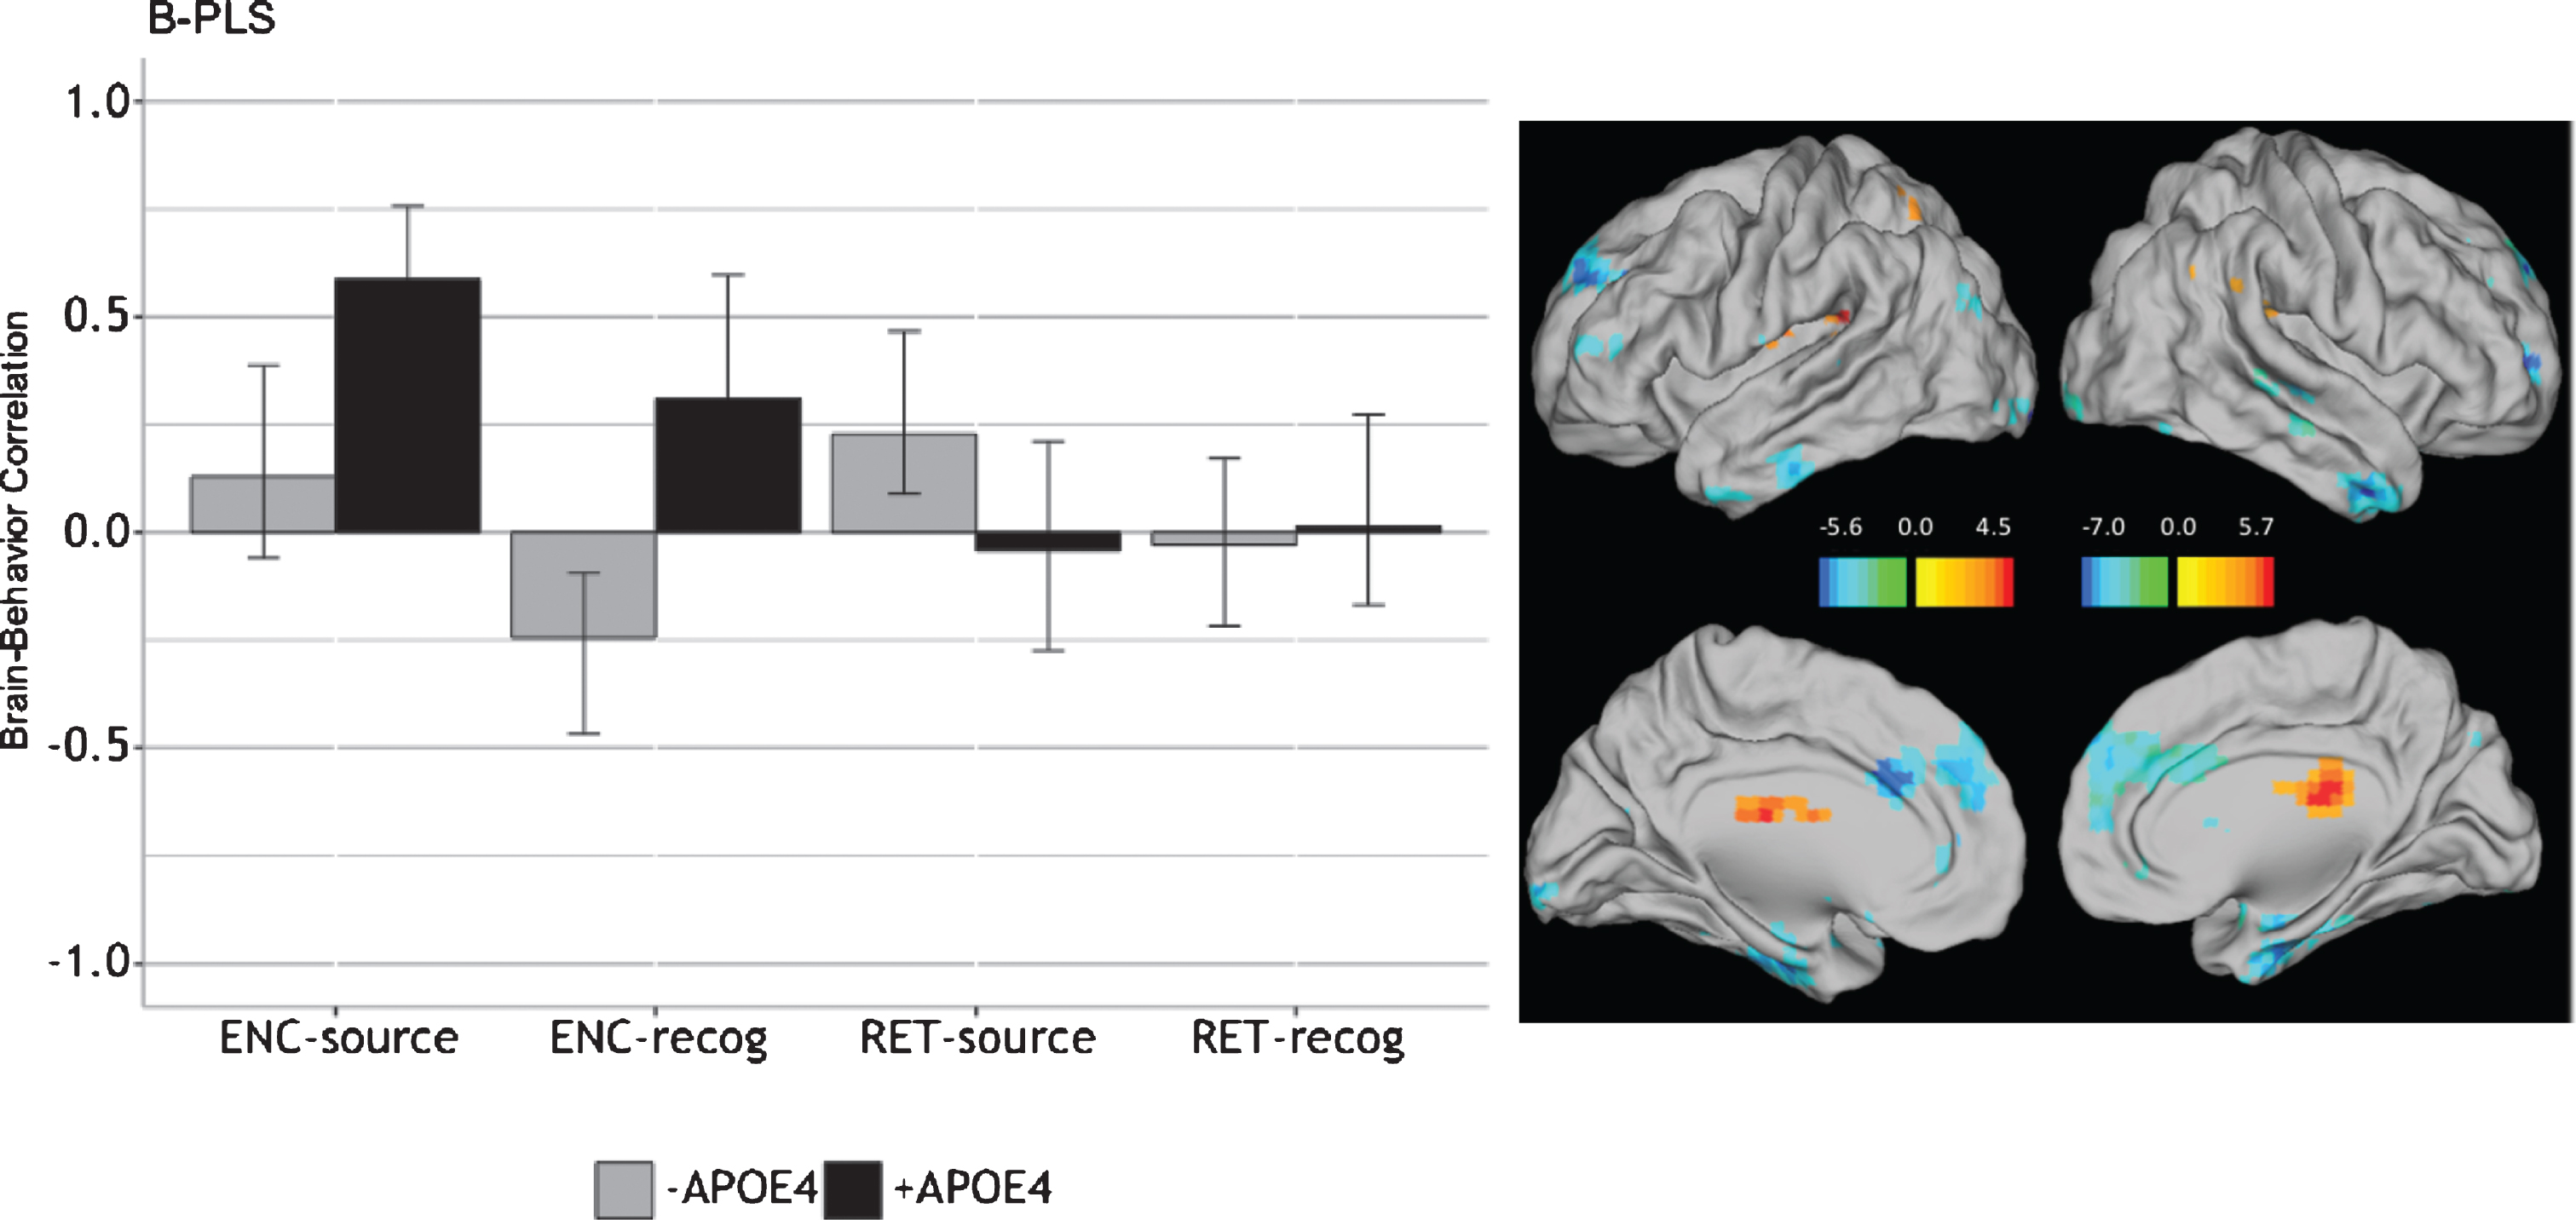 Correlations between brain activity and task performance by condition, revealed by the B-PLS analysis. LEFT: Bars represent brain-behavior correlations for each group, by condition. Positive correlations indicate conditions in which performance was positively associated with activity in positive brain salience regions (shown in red in the singular images) and vice-versa. Negative correlations indicate conditions in which performance was positively associated with activity in negative brain salience regions (shown in blue in the singular images) and vice-versa. Error bars represent 95% confidence intervals. RIGHT: The singular image thresholded at a bootstrap ratio of±3.5, p < 0.001. Red brain regions represent positive brain saliences; blue regions represent negative brain saliences. Activations are presented on template images of the lateral and medial surfaces of the left and right hemispheres of the brain using Caret software (http://brainvis.wustl.edu/wiki/index.php/Caret:Download).